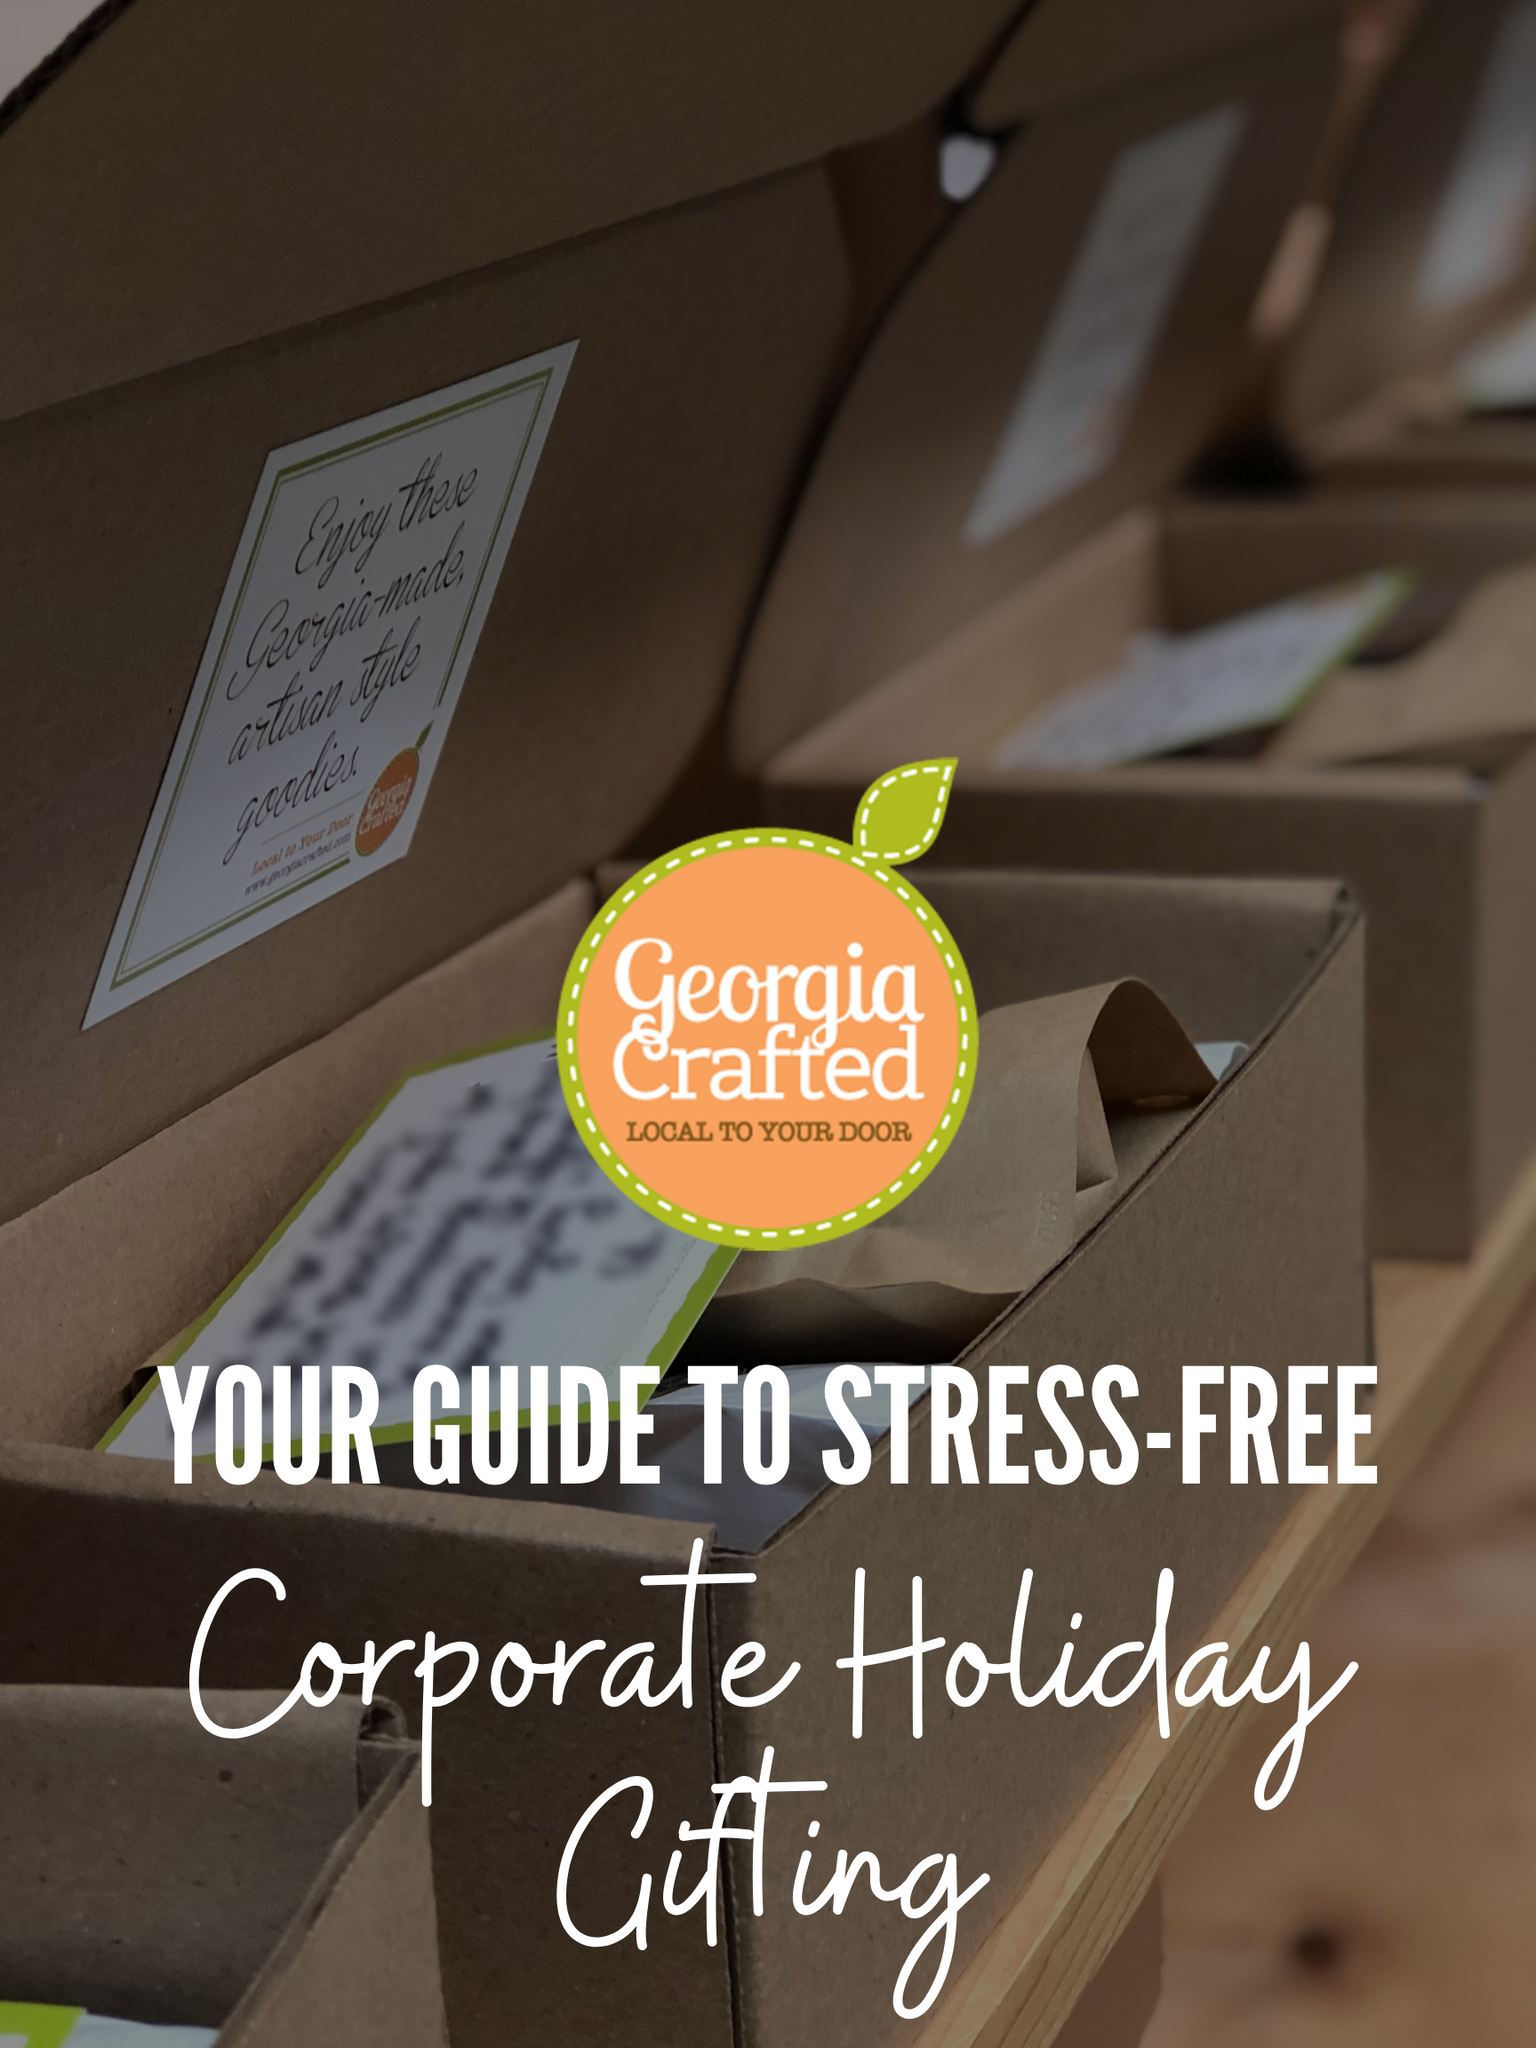 Your Guide to Stress-Free Holiday Corporate Gifting